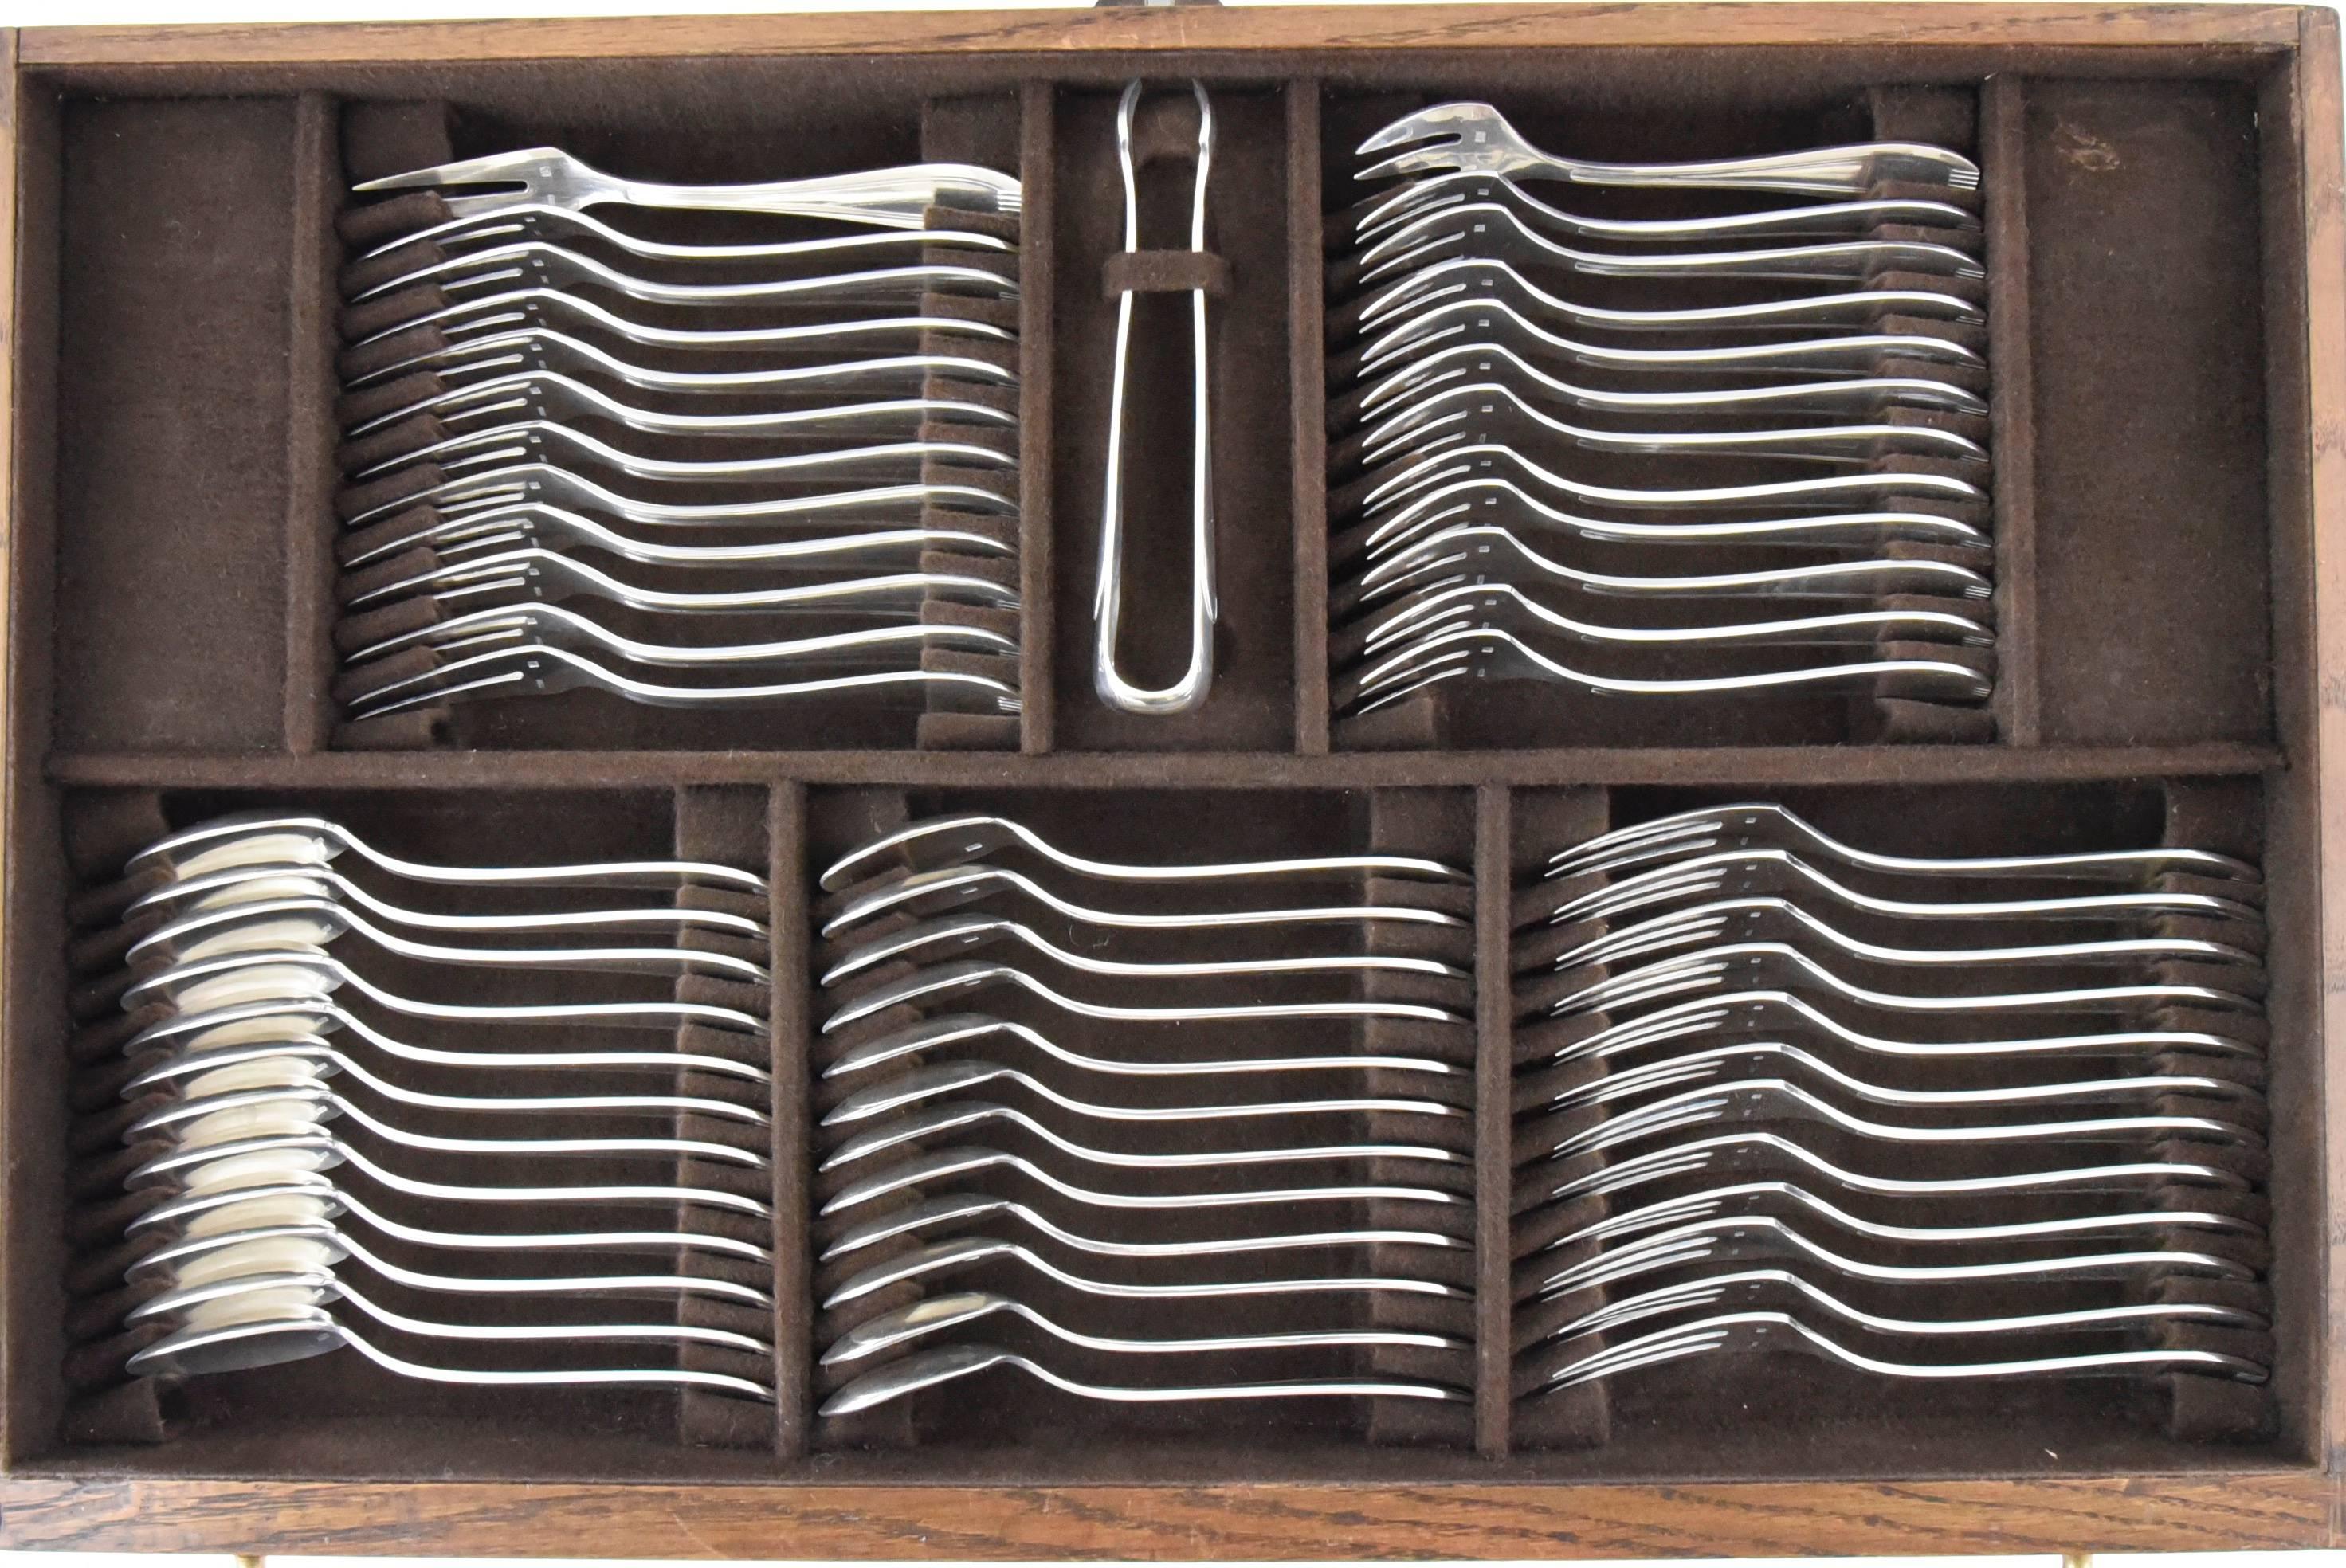 20th Century Art Deco Silver Plated 178 pc cutlery set by Frionnet in Original Case, 1930